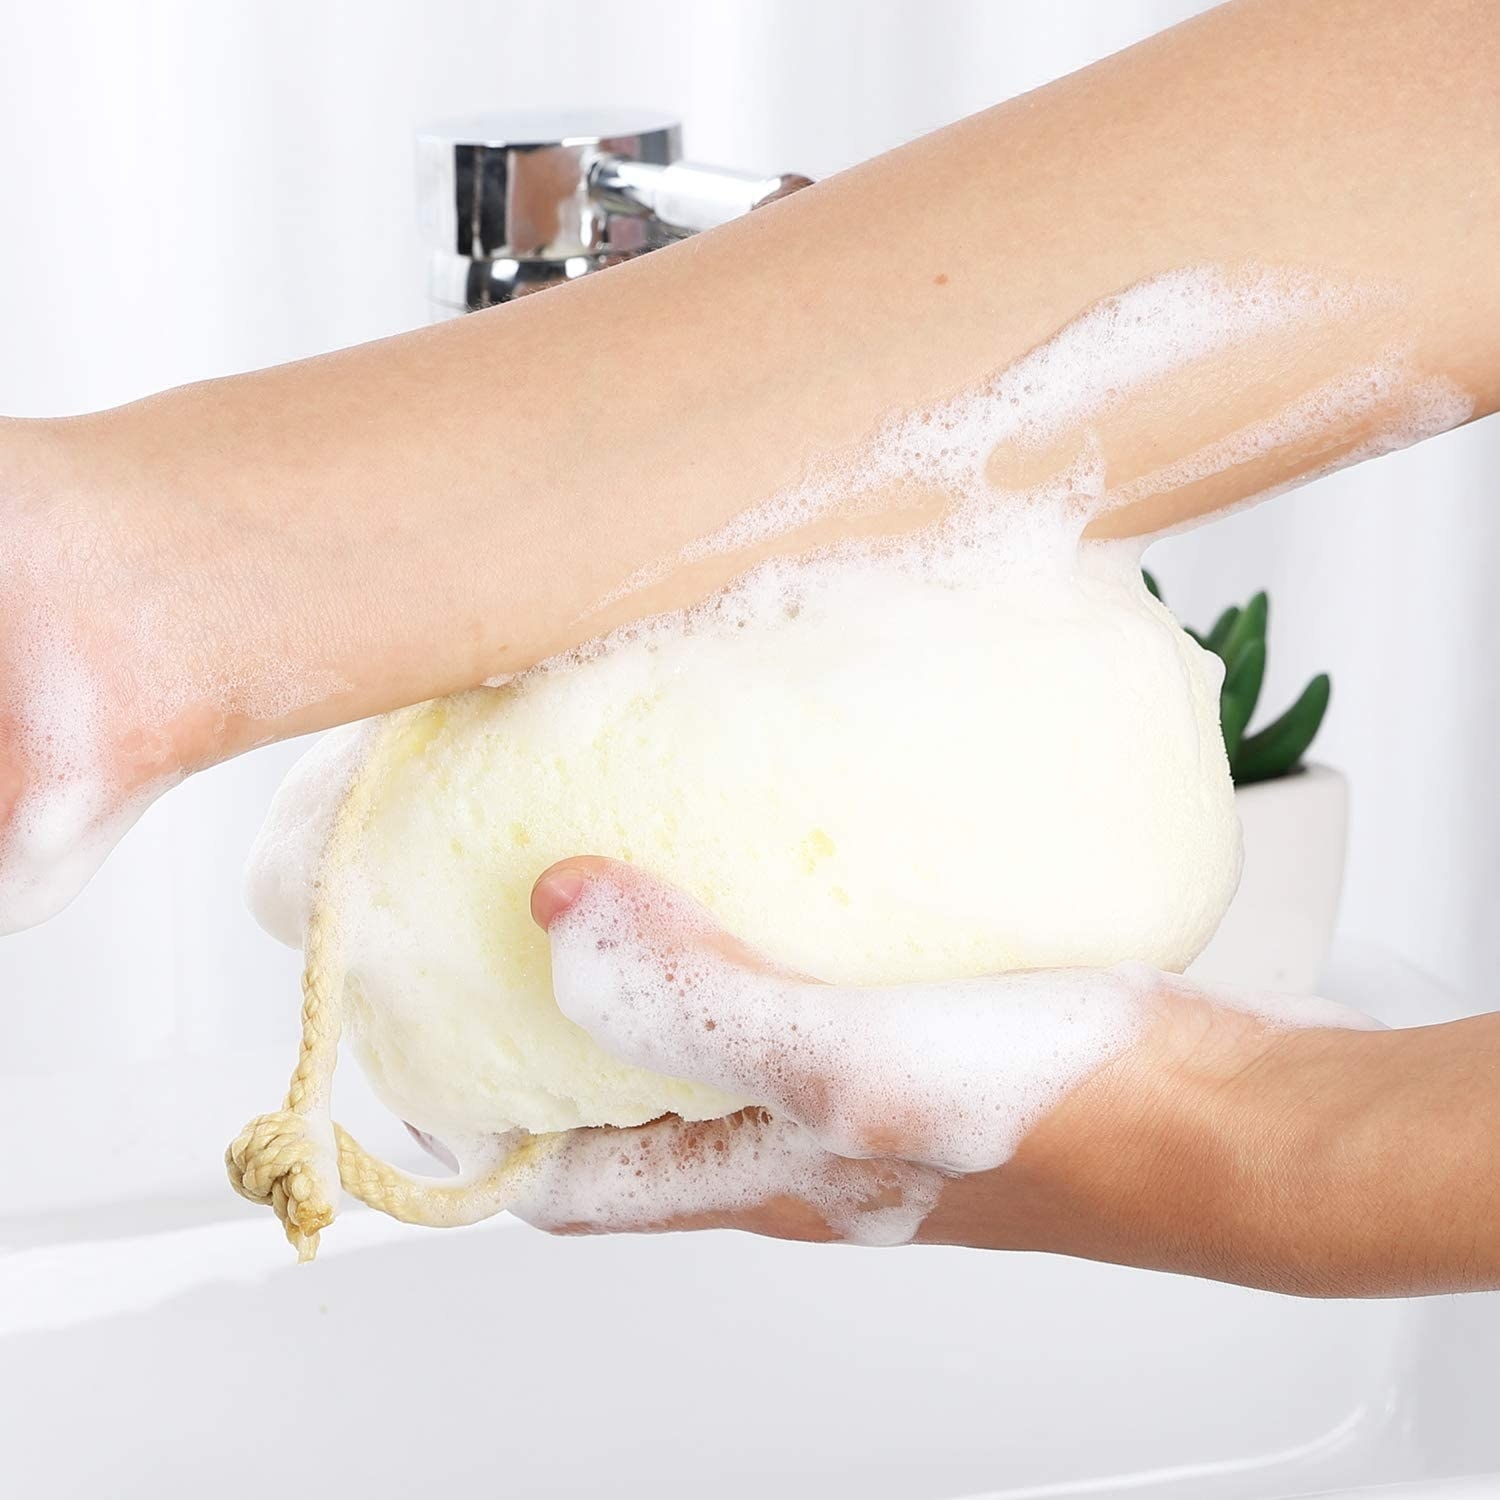 A person scrubbing their arm with the loofah